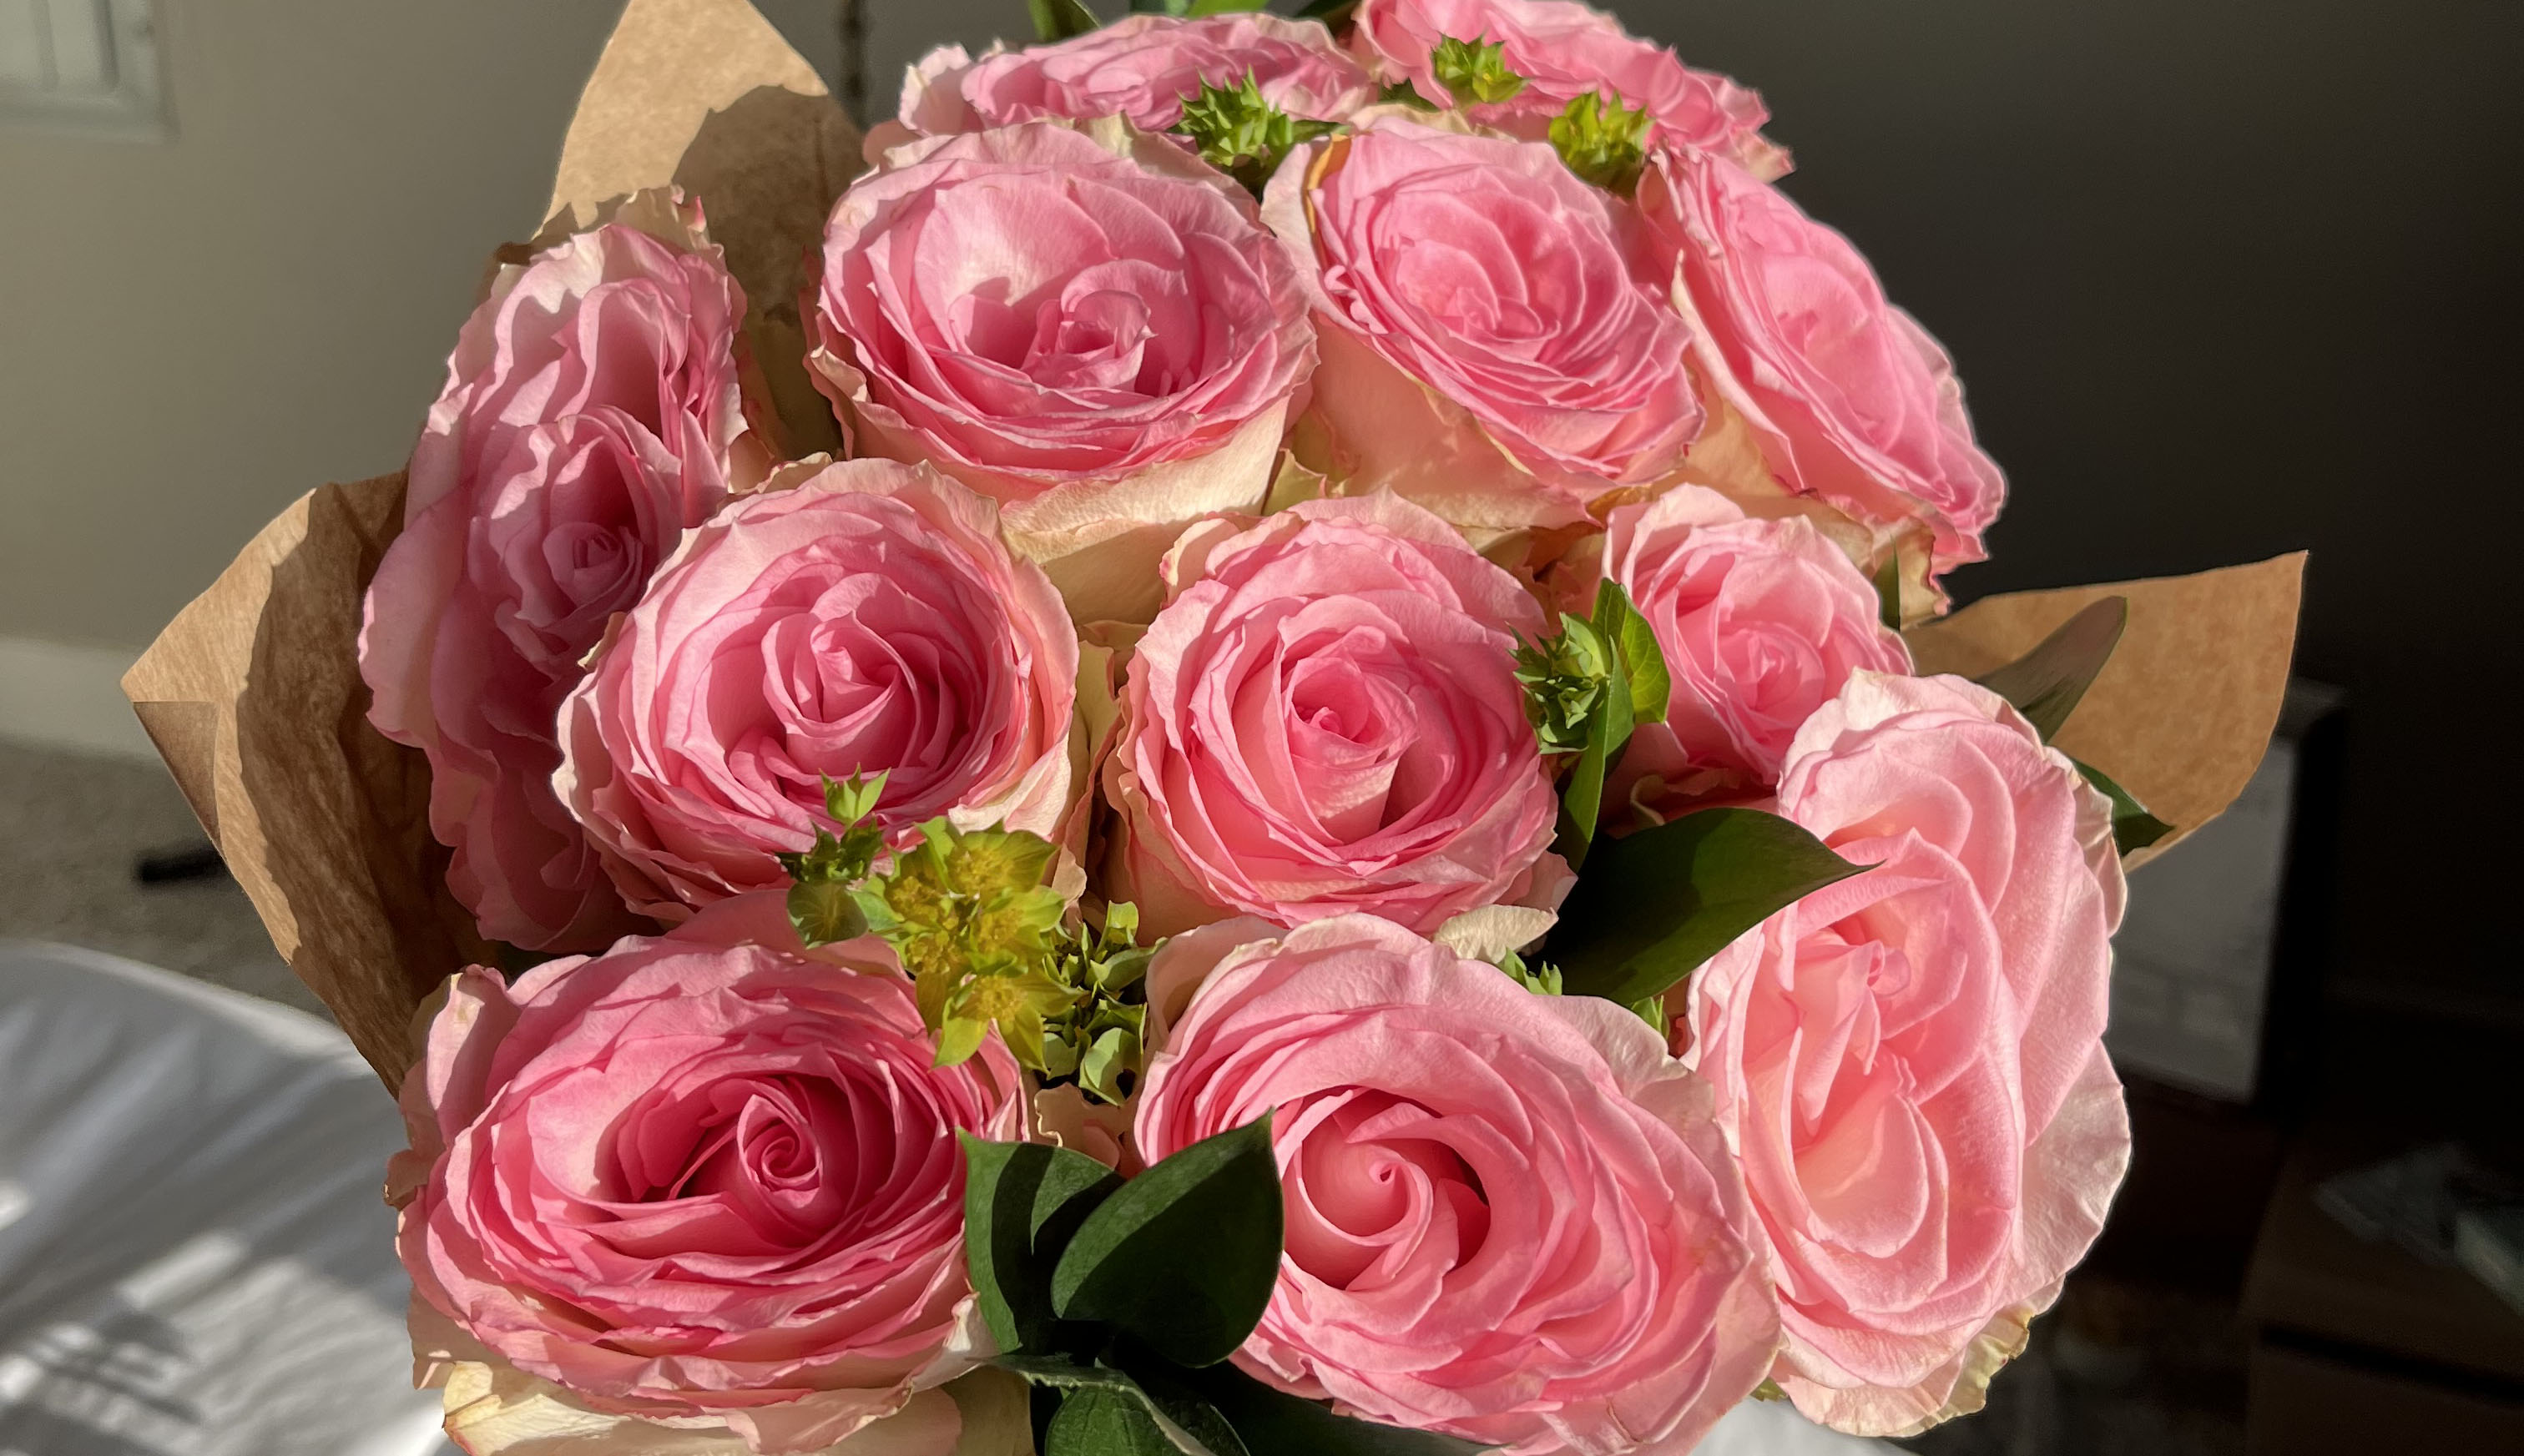 Flowers for Easter 2023. A bouquet of bright pink roses perfect for Easter